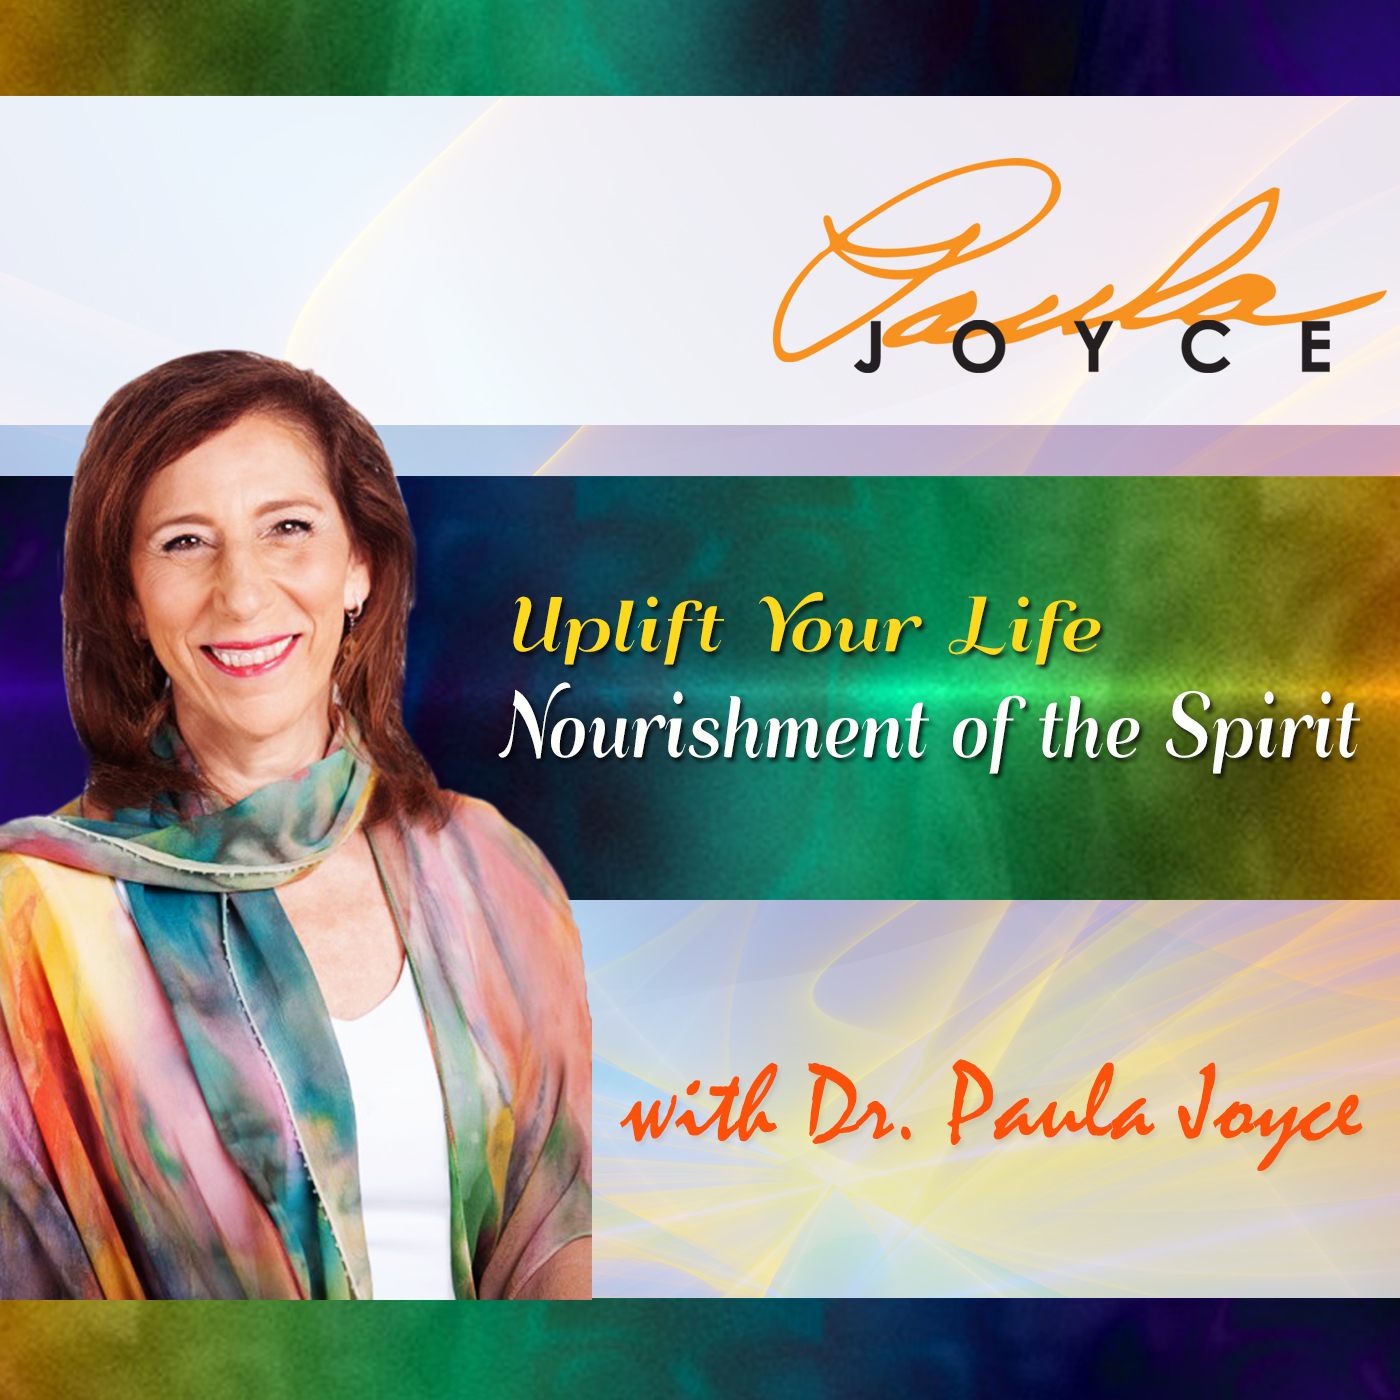 You Don’t Have To Be Perfect, with Sam Bennett By Dr. Paula Joyce